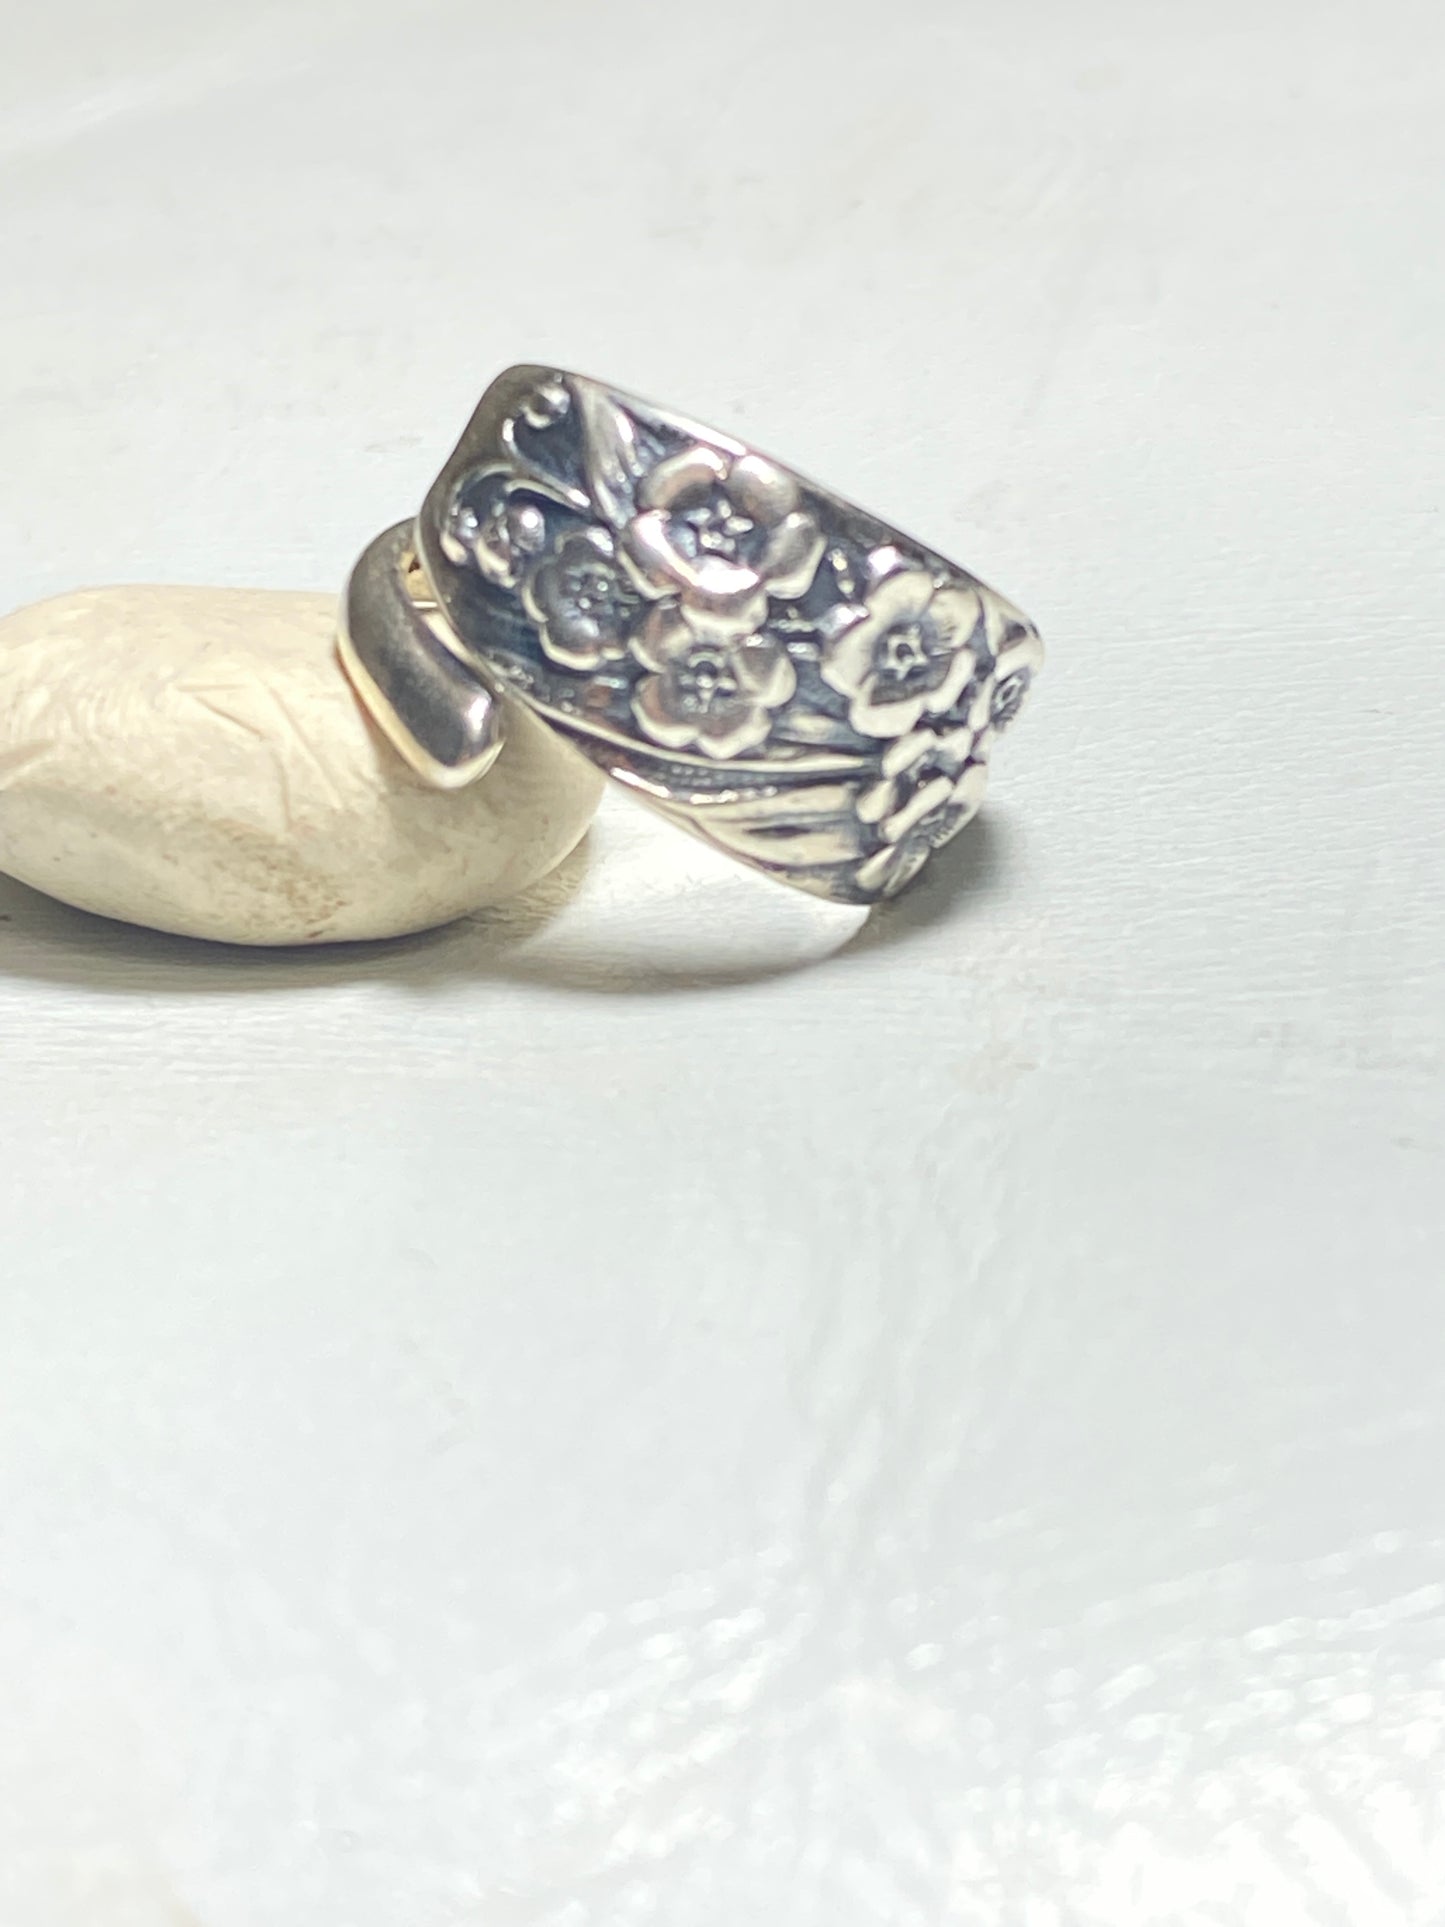 Floral spoon ring flowers forget me knot band sterling silver band women